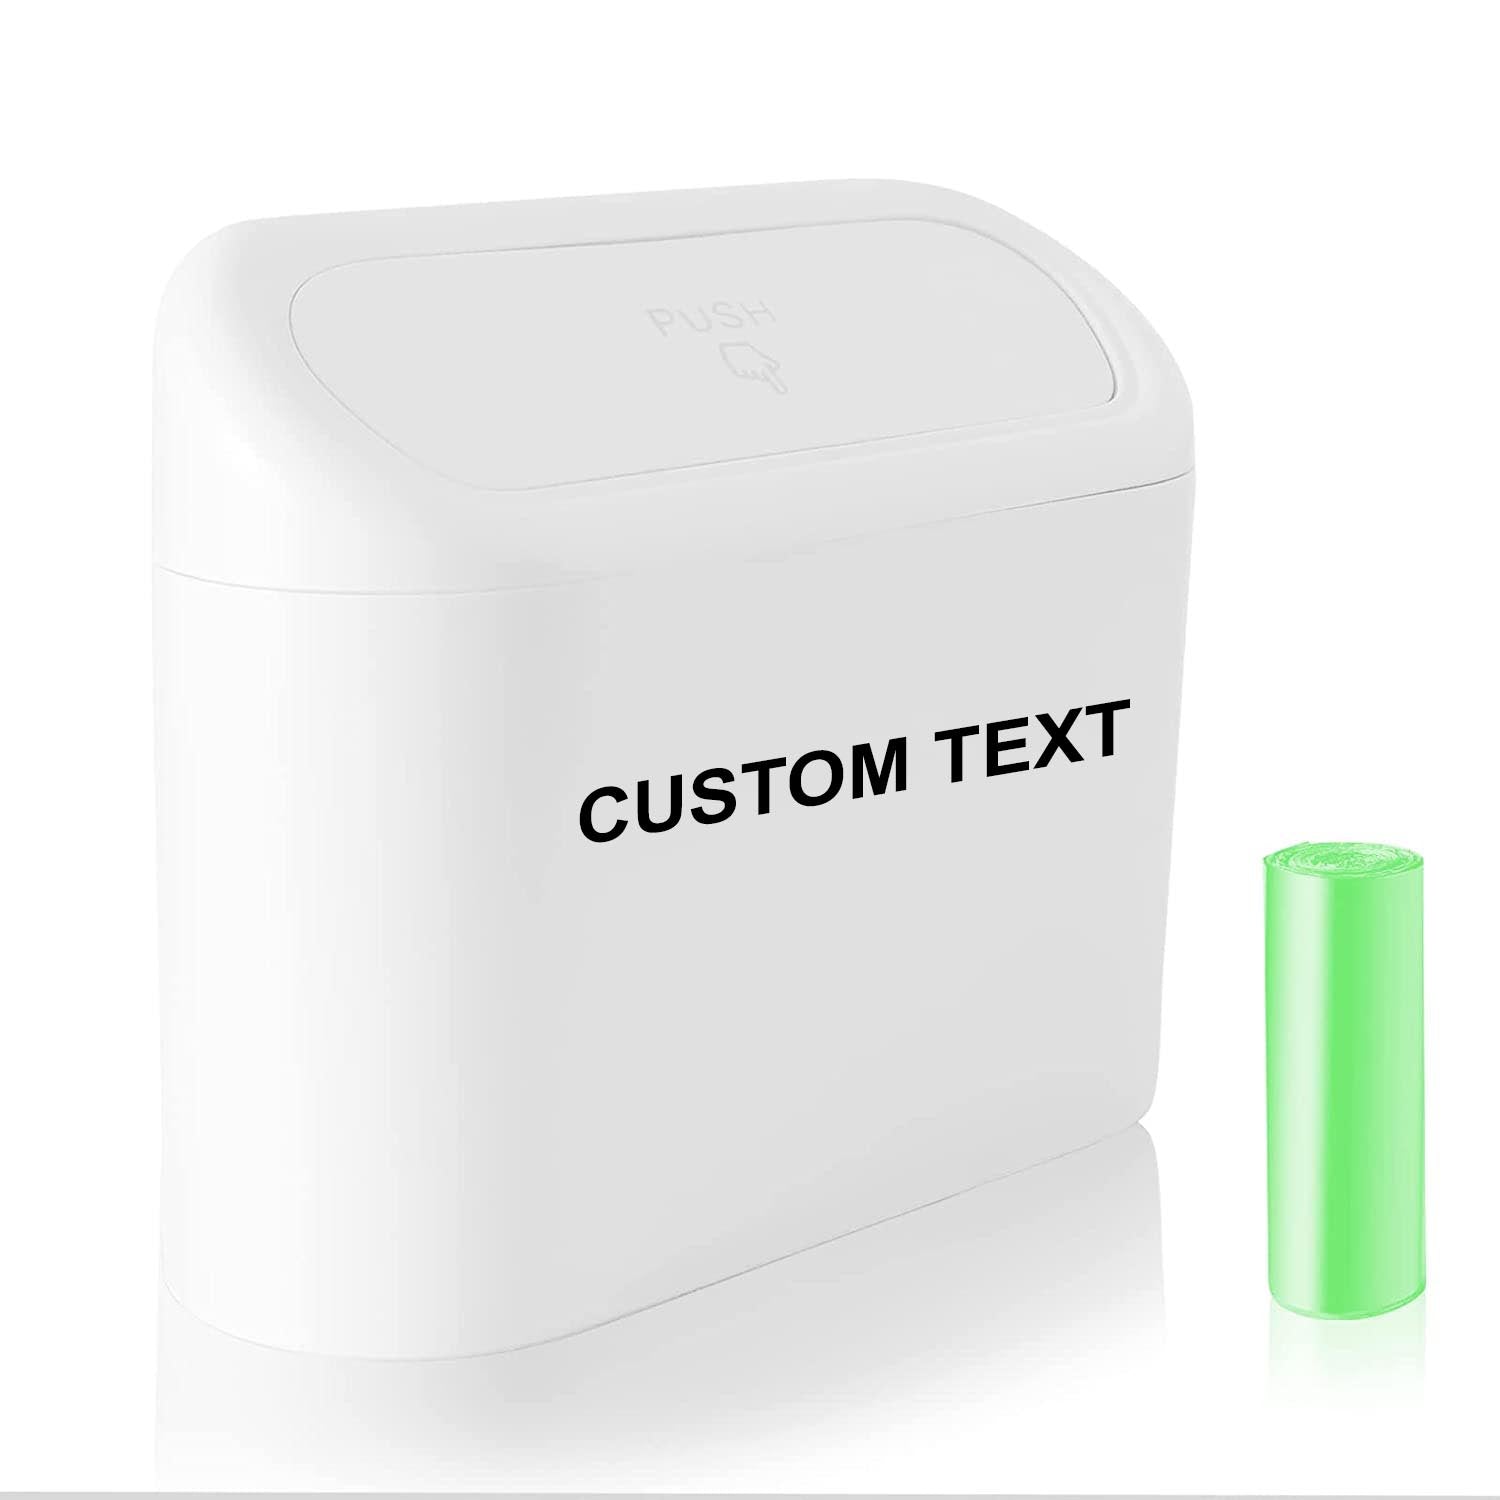 Custom Text and Logo Car Trash Can, Fit with all car, Mini Car Accessories with Lid and Trash Bag, Cute Car Organizer Bin, Small Garbage Can for Storage and Organization